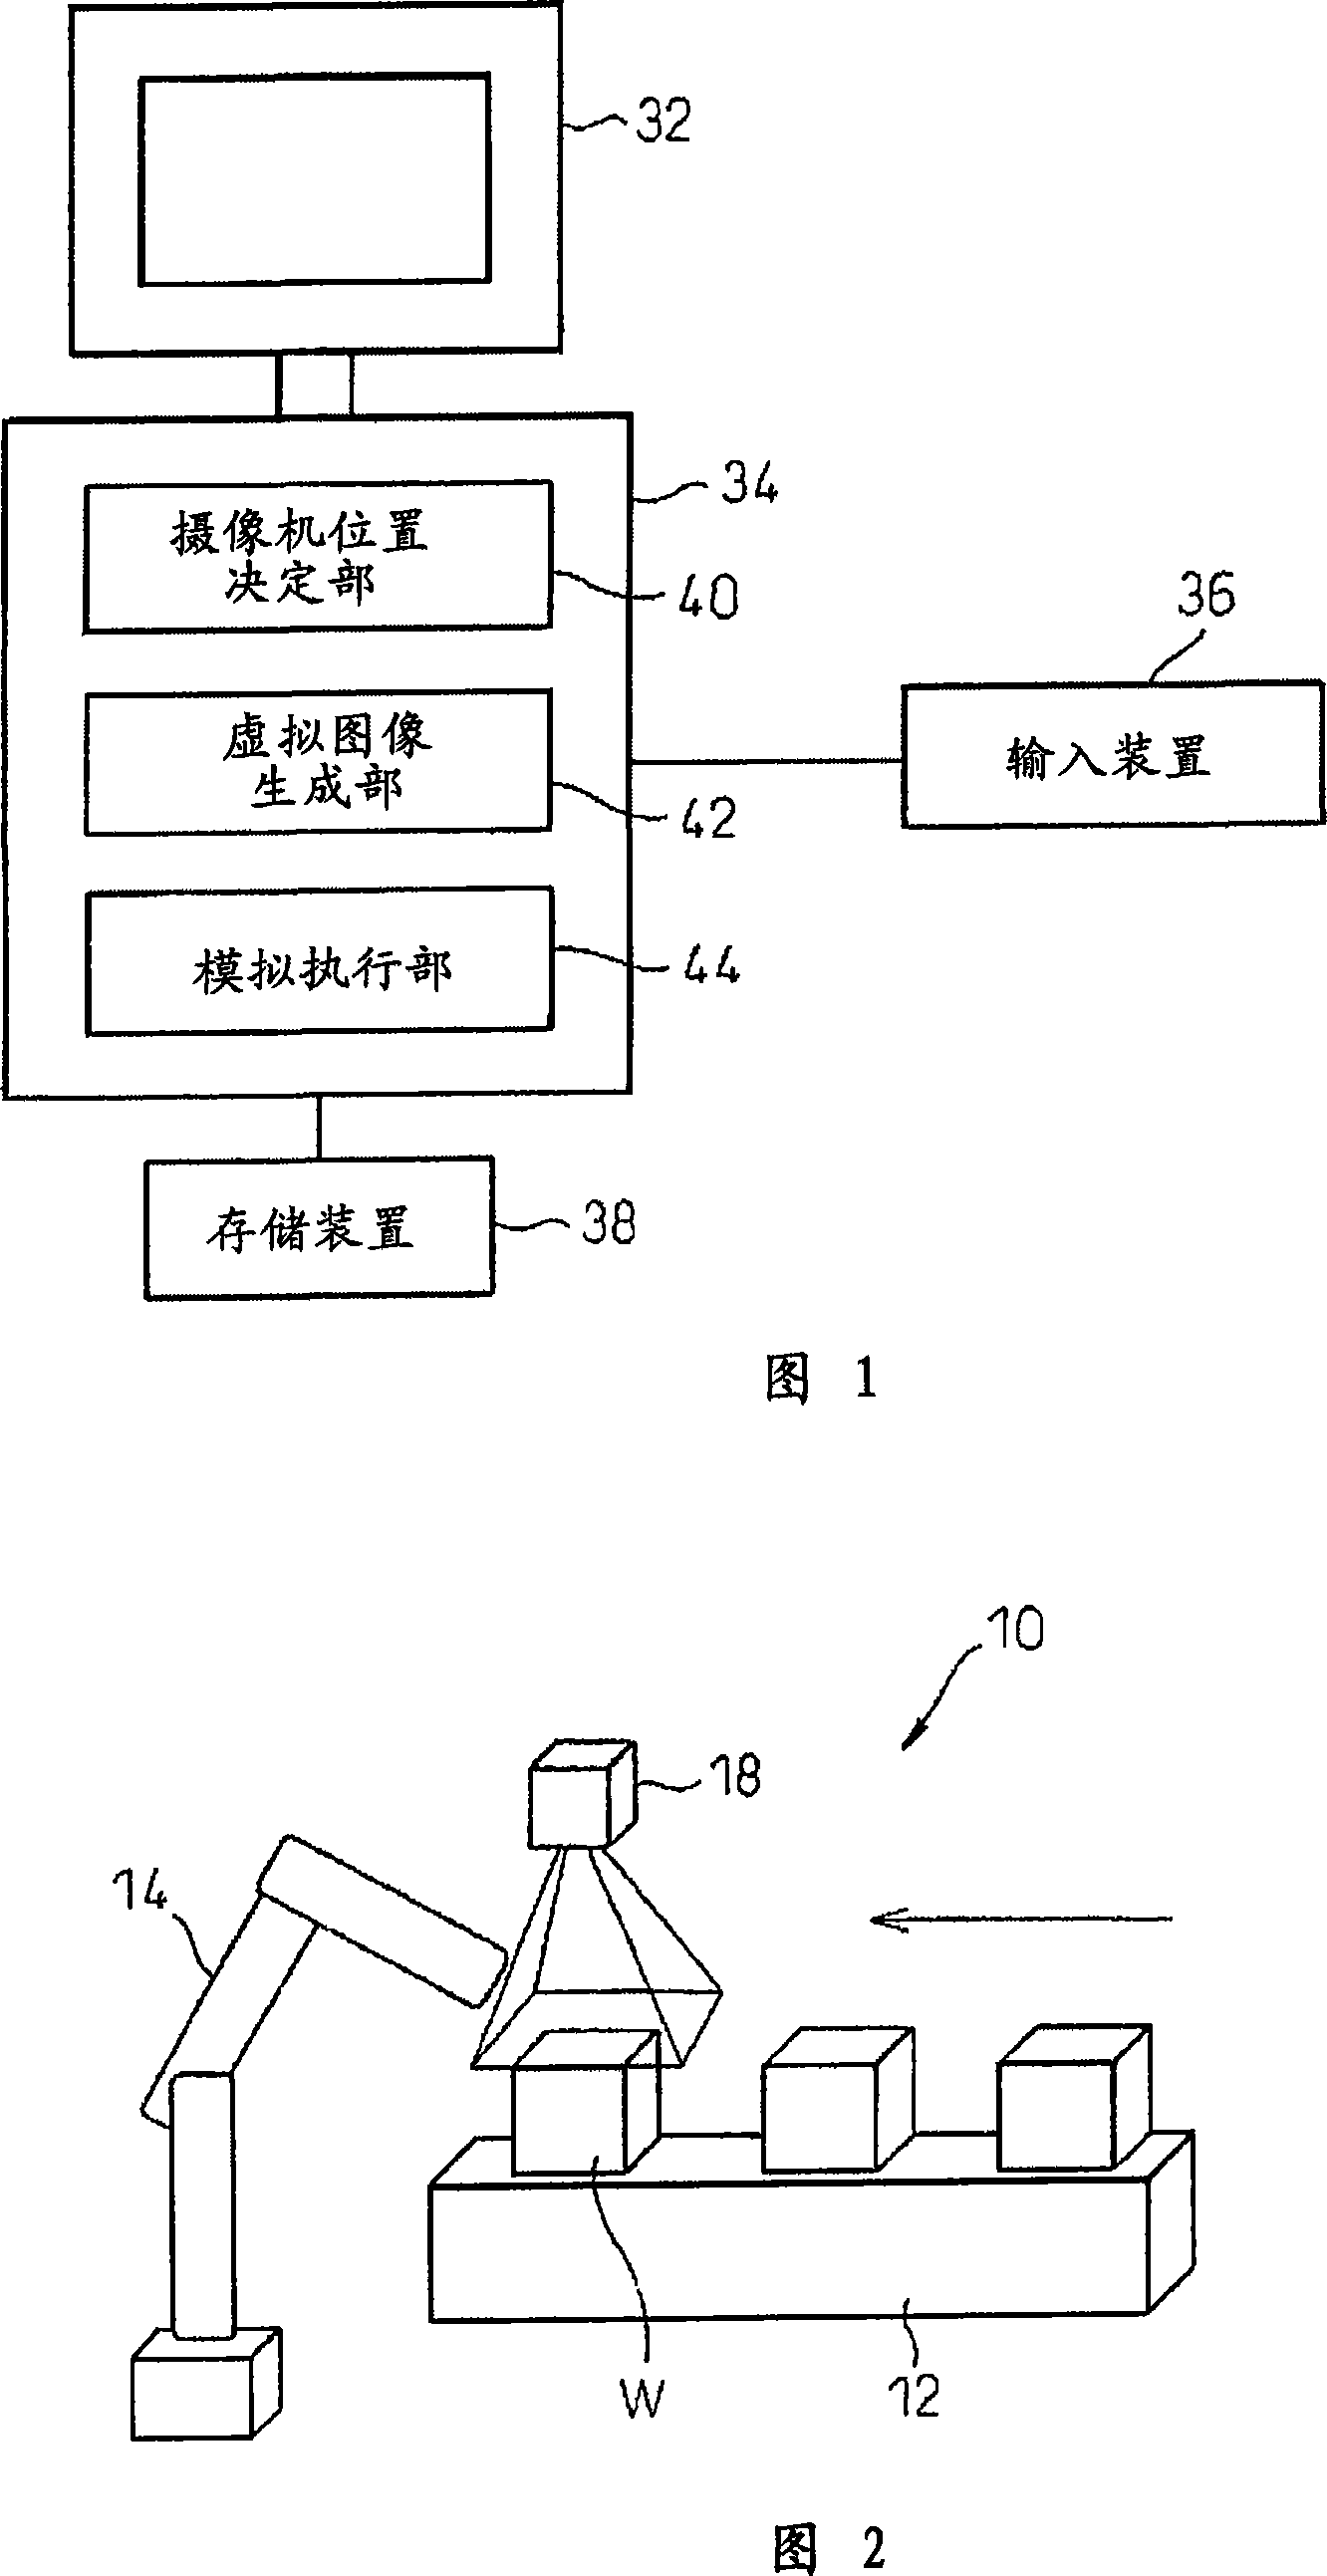 Simulation device of robot system